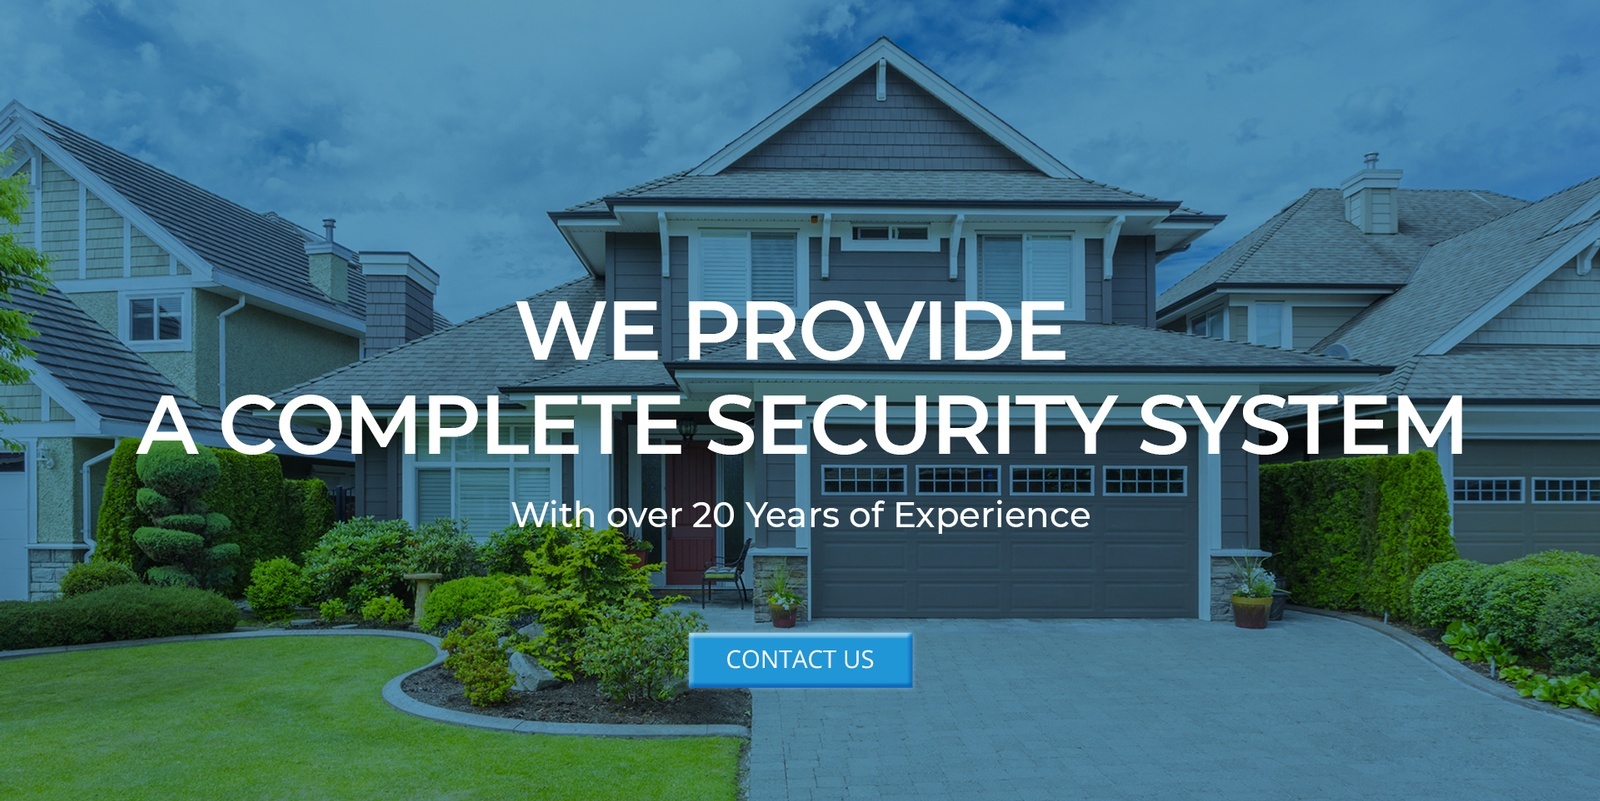 Sky Security Supplies Protection For Residential And Commercial Clients